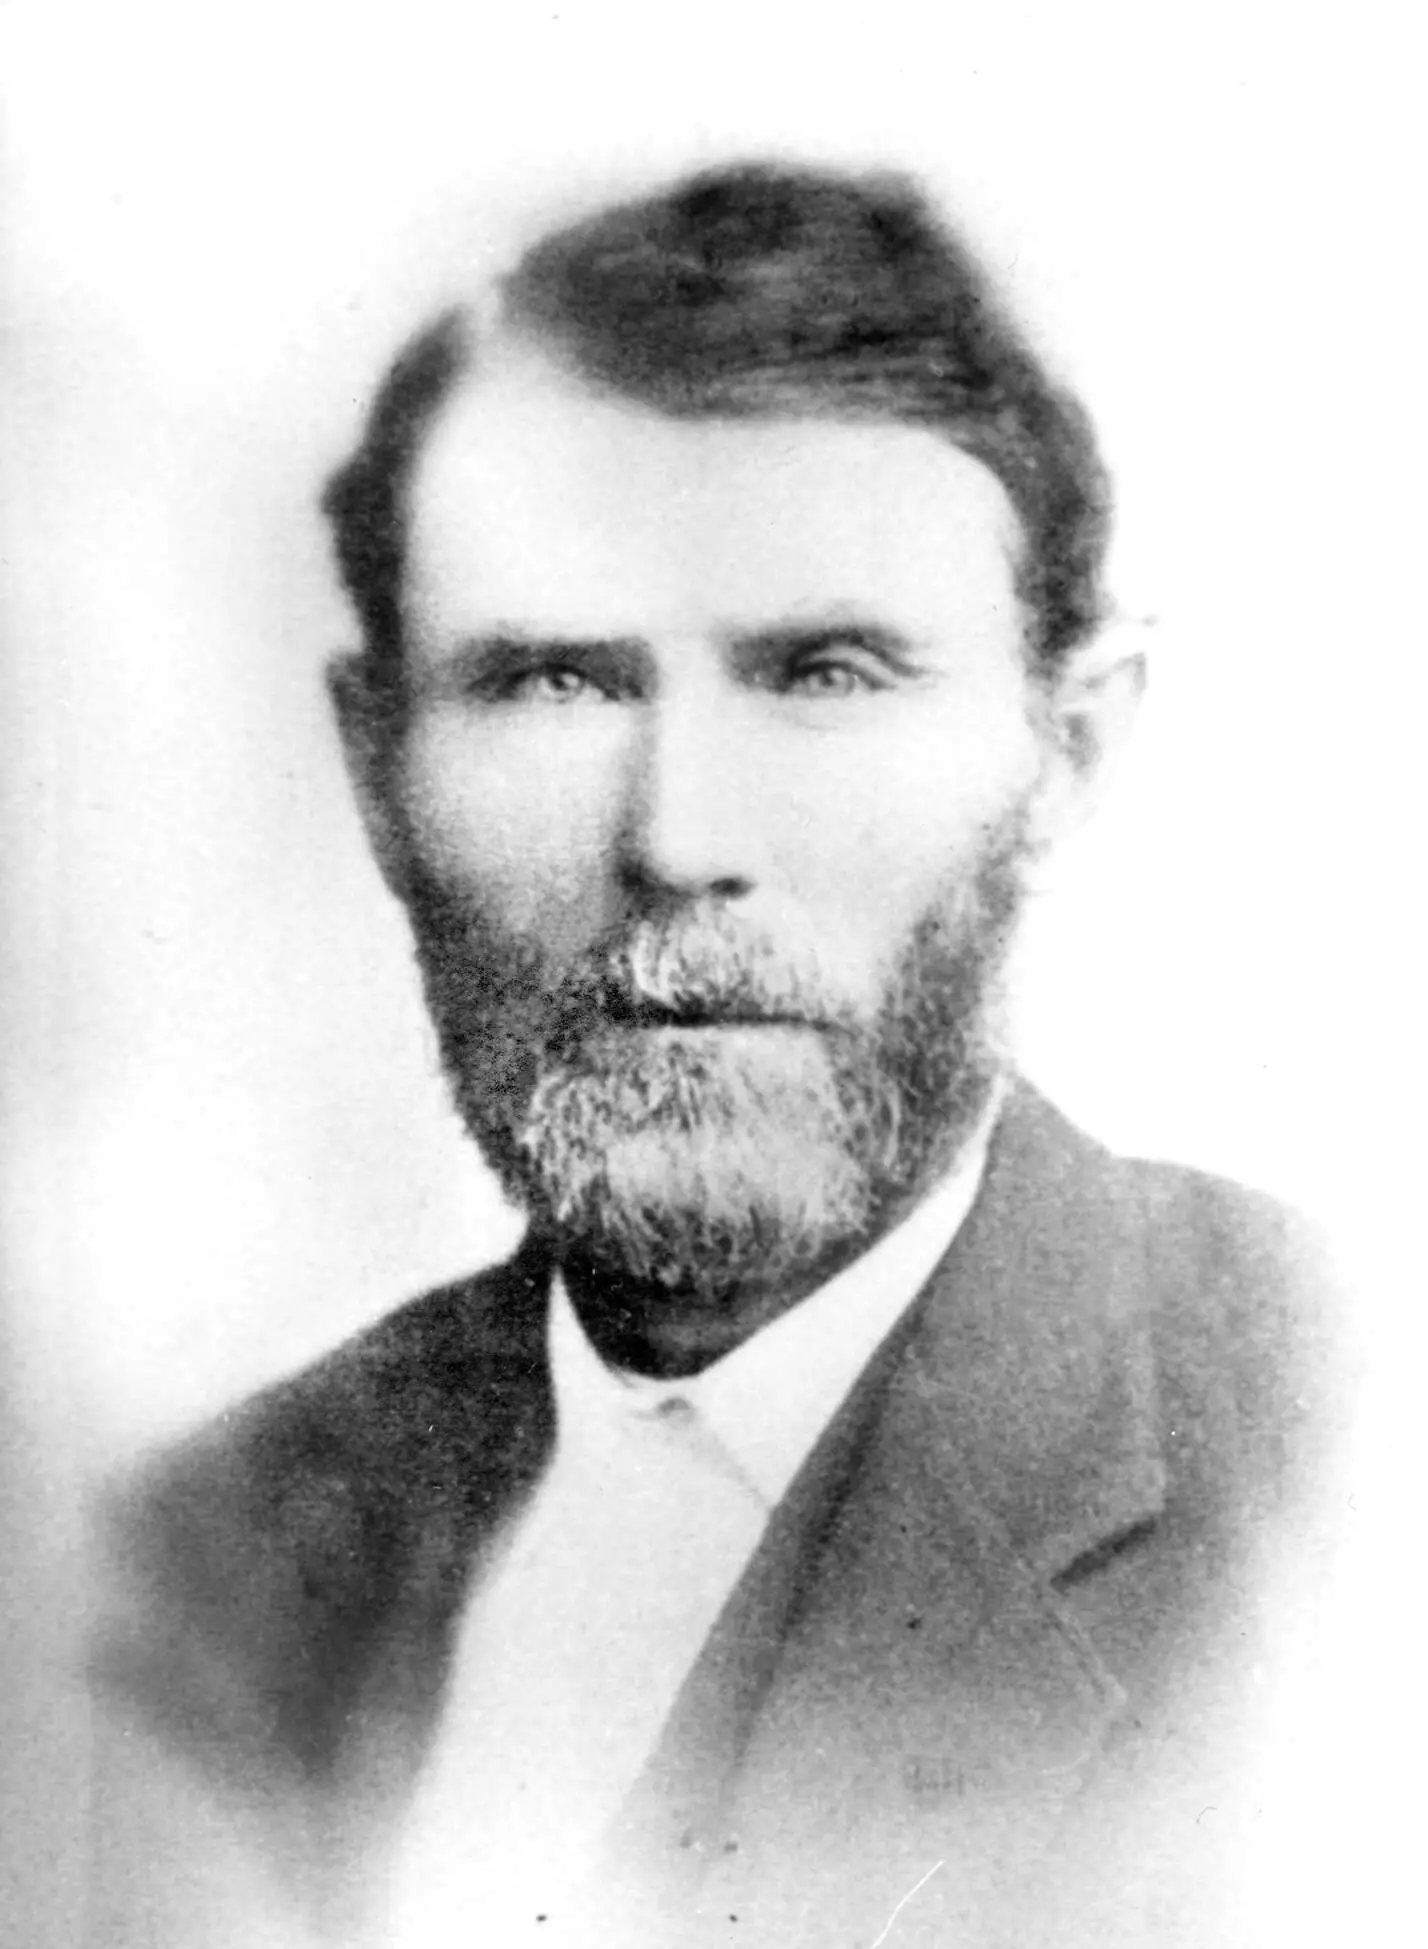 Black and white photograph of a white man with a salt and pepper beard and dark hair combed to the side. he is wearing a suit and white collared shirt.